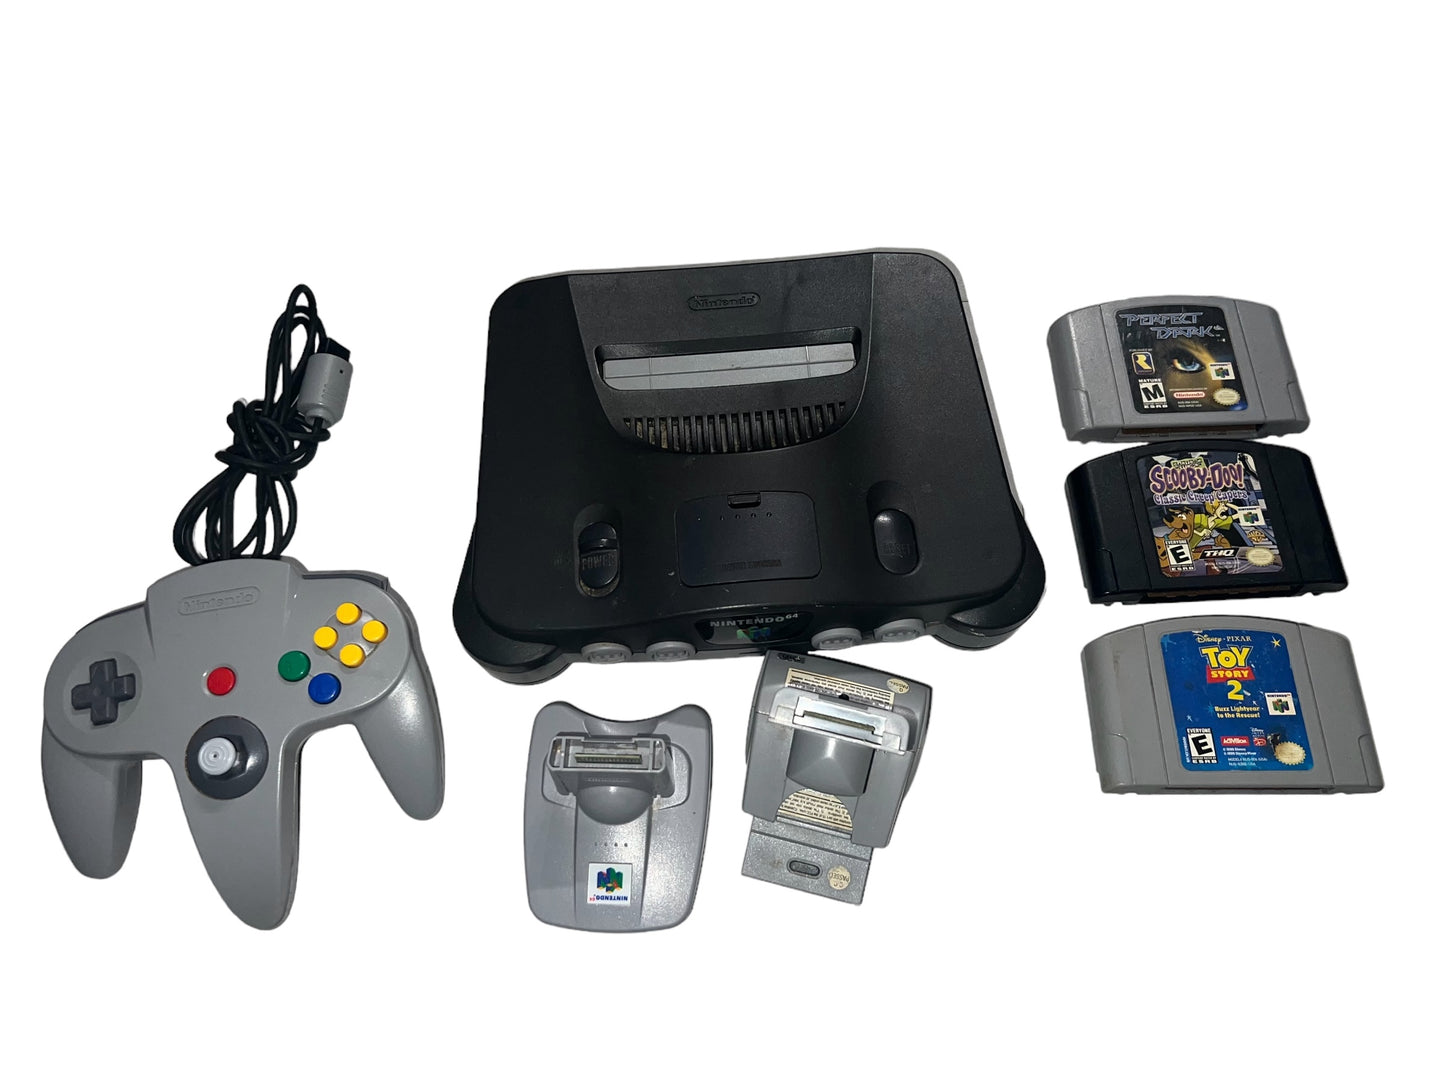 Nintendo64 N64 Consoles NUS-001 Untested With 3 Games (Scooby Doo, Toy Story 2 & Perfect Dark)